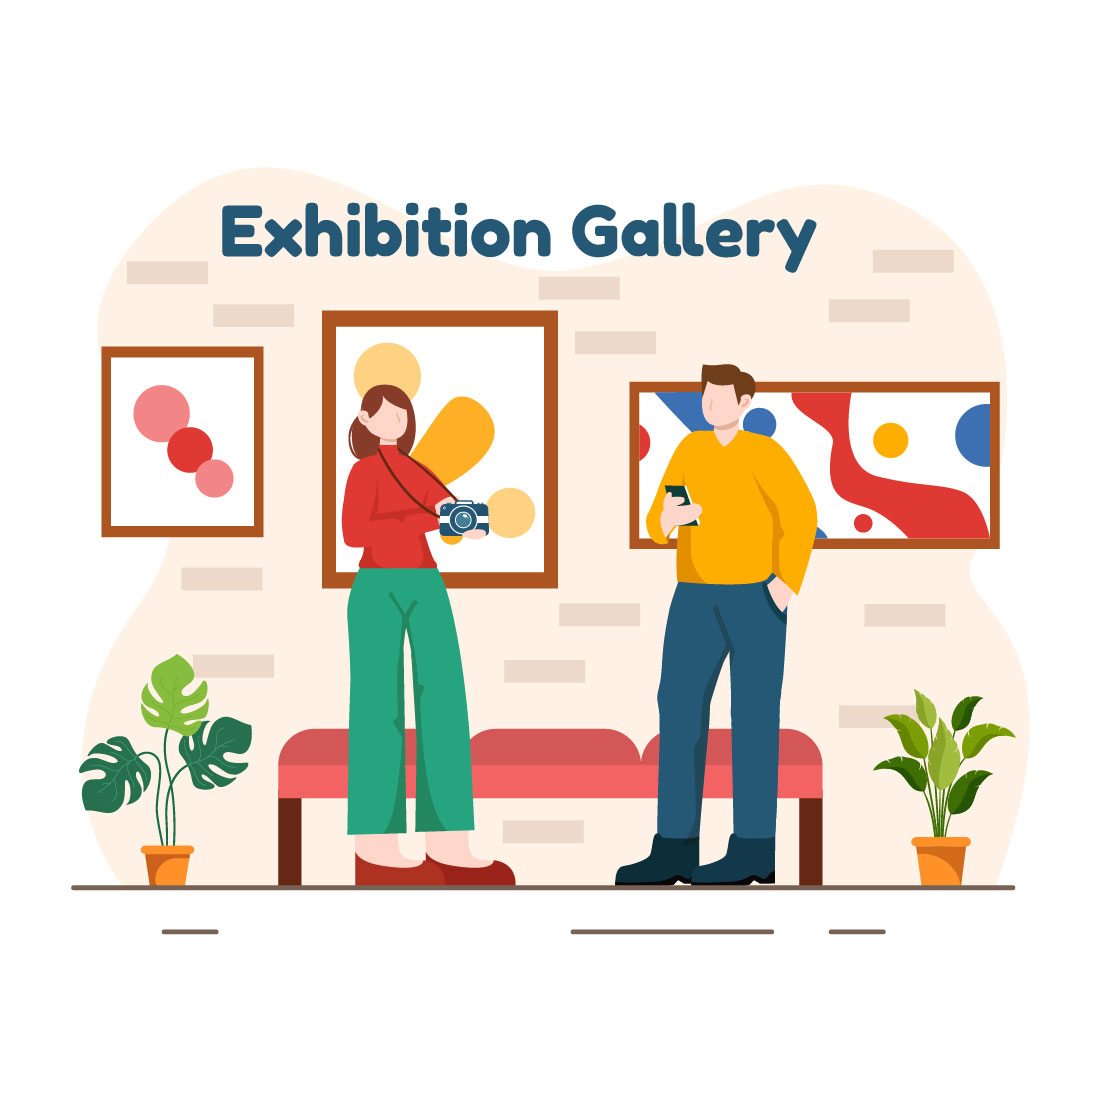 12 Exhibition Gallery Illustration cover image.